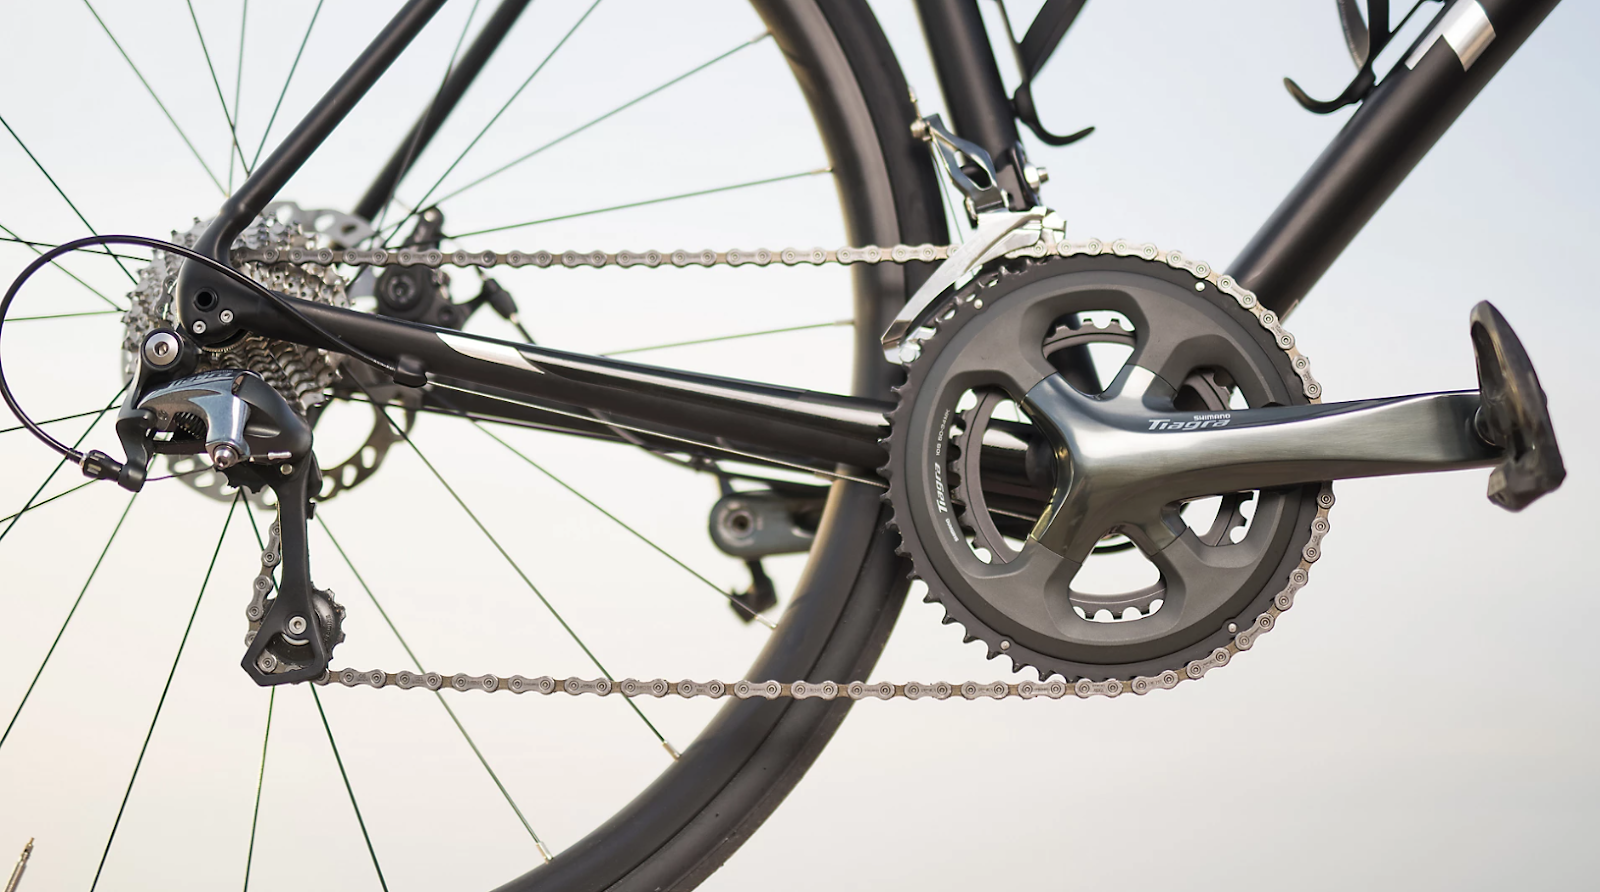 Keep your mountain bike chain well lubed so that it can run smoothly and transfer the power from your pedals to propel your bike ahead.